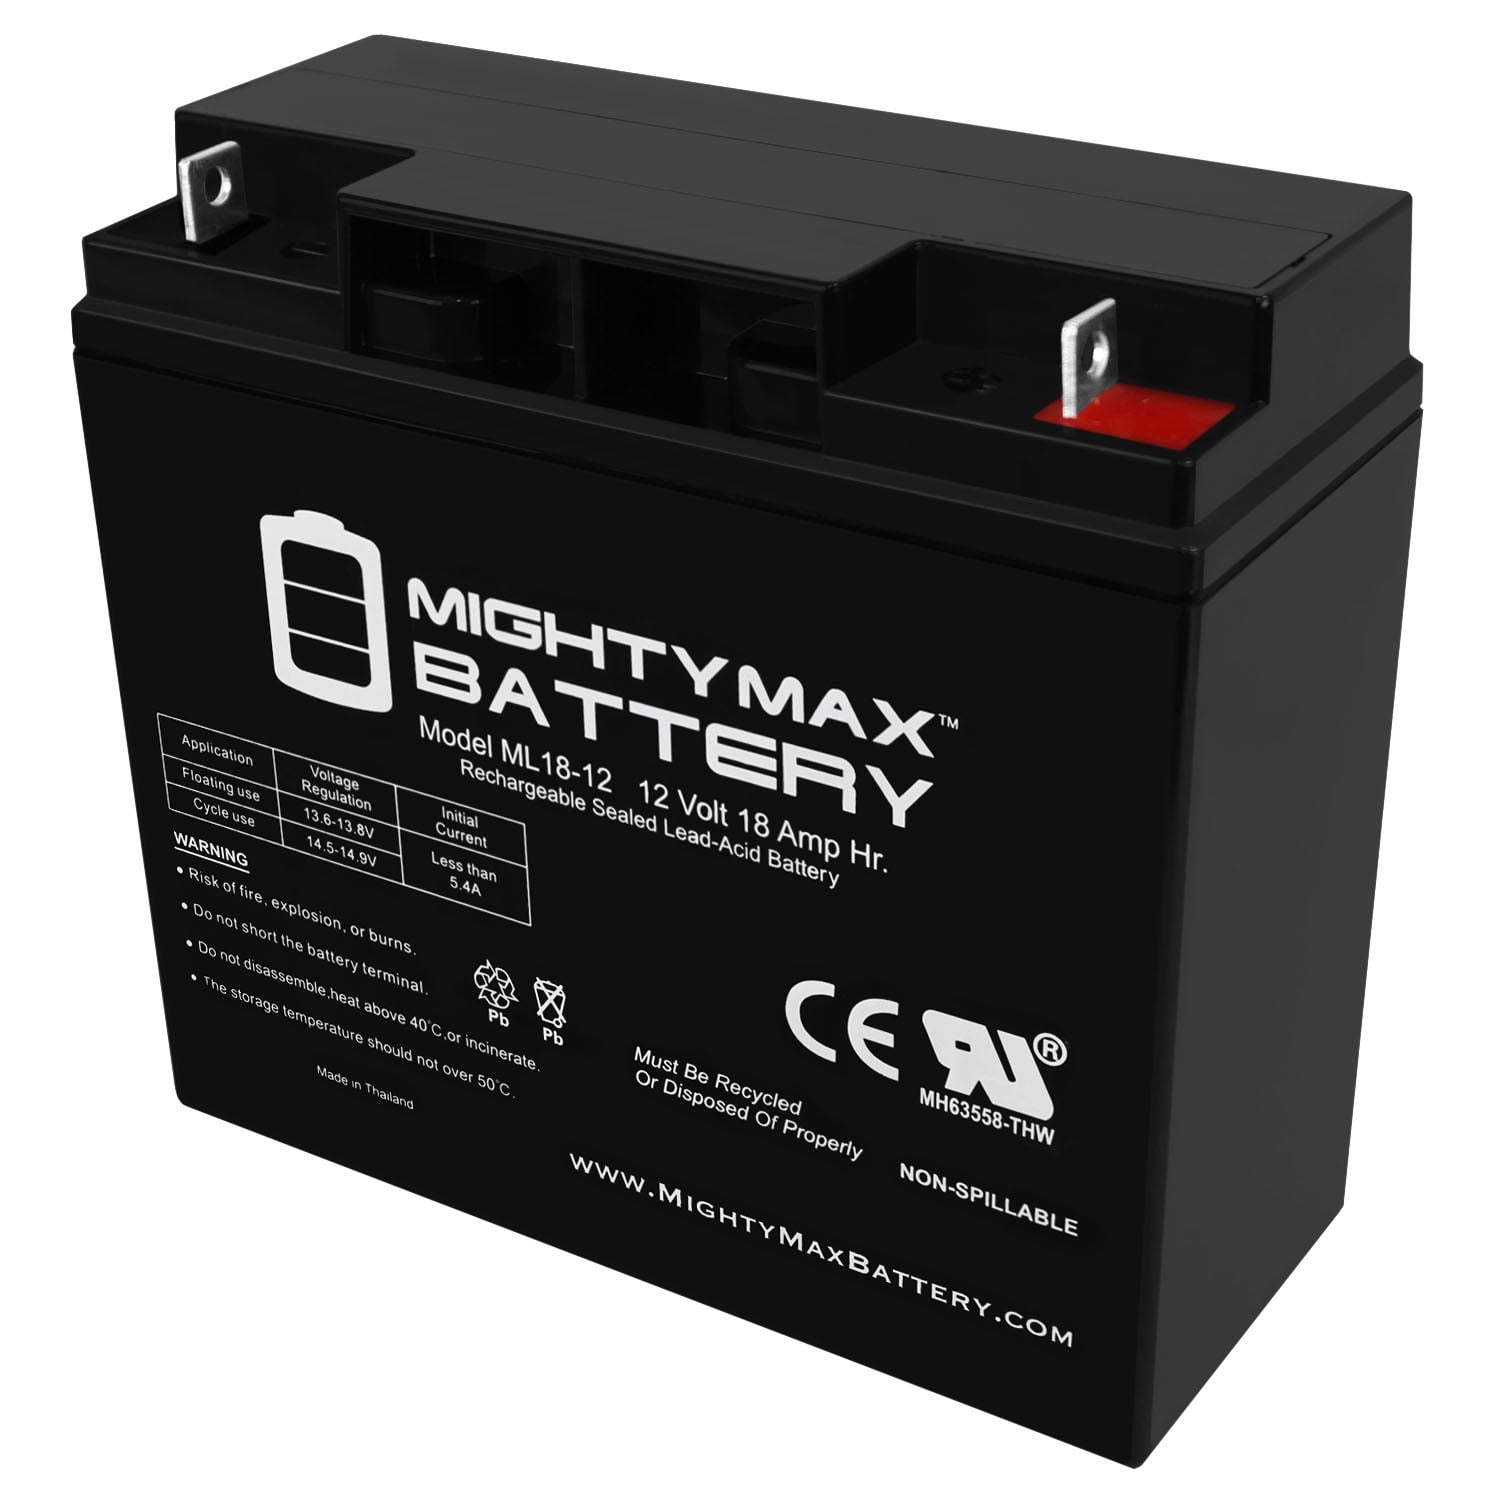 para Systems E 2300 12V 12Ah UPS Battery This is an AJC Brand Replacement